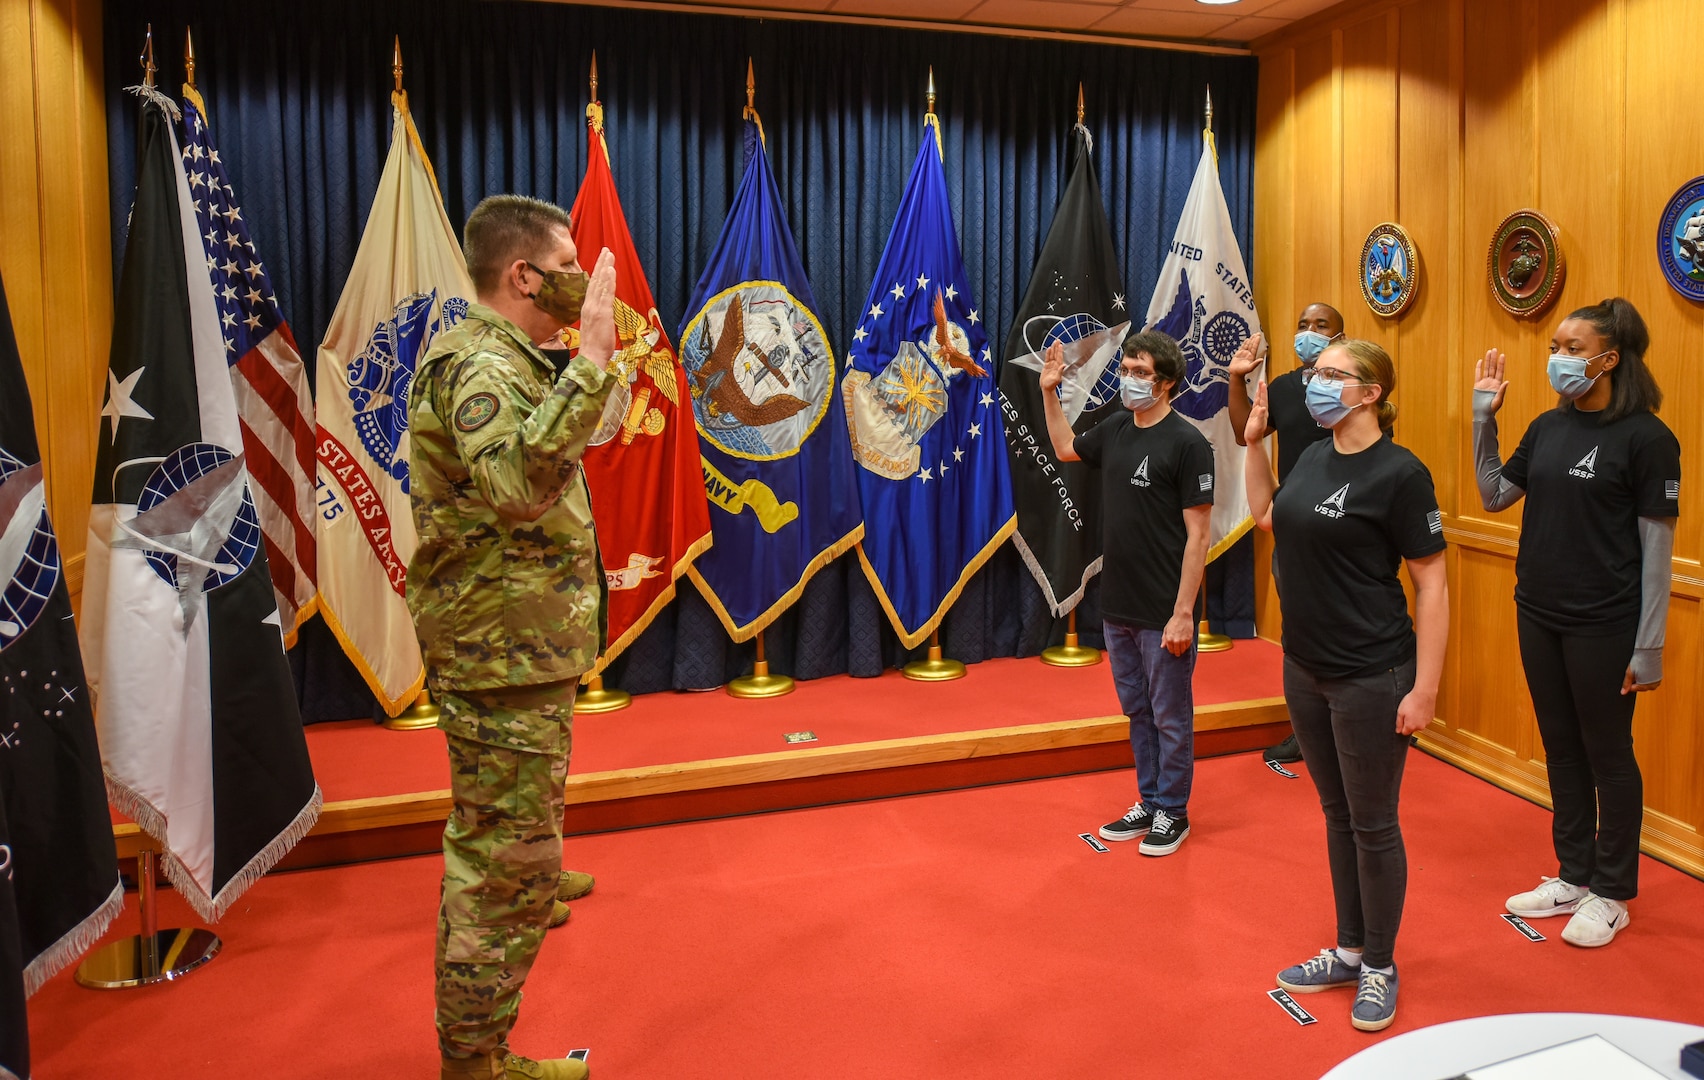 The Vice Chief of Space Operations Gen. David D. “DT” Thompson swore in the first four Space Force recruits at the Baltimore Military Entrance Processing Command station, Fort George G. Meade, Maryland, Oct. 20, 2020. The first four recruits will join others from Colorado, placing them on a direct path to Basic Military Training at Joint Base San Antonio-Lackland and marking another milestone in the new service’s growth and development.